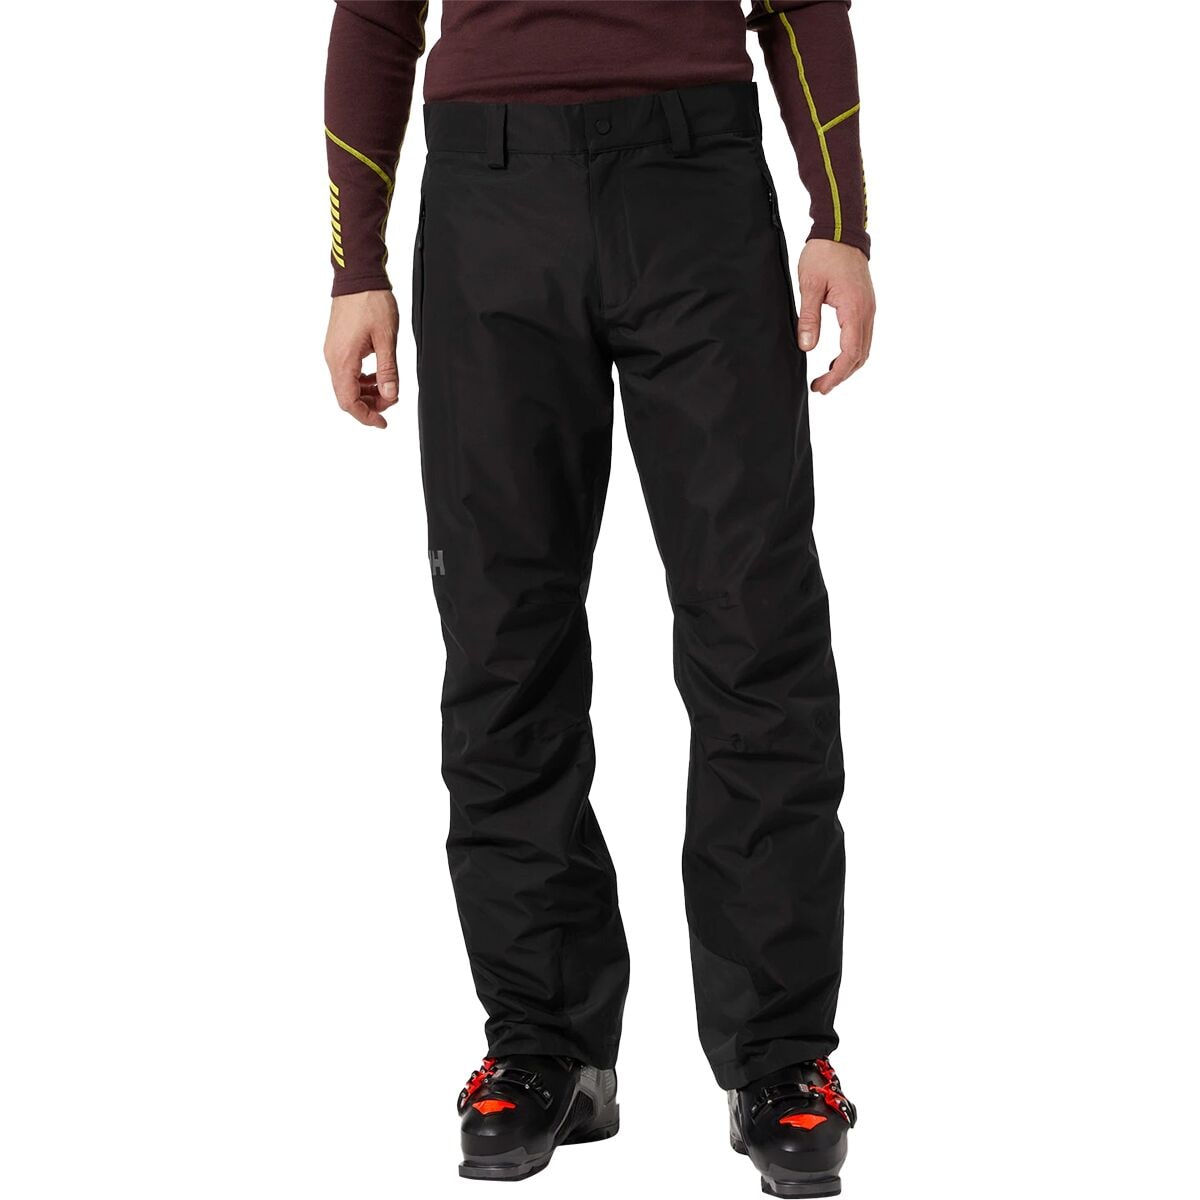 Blizzard Insulated Pant - Men